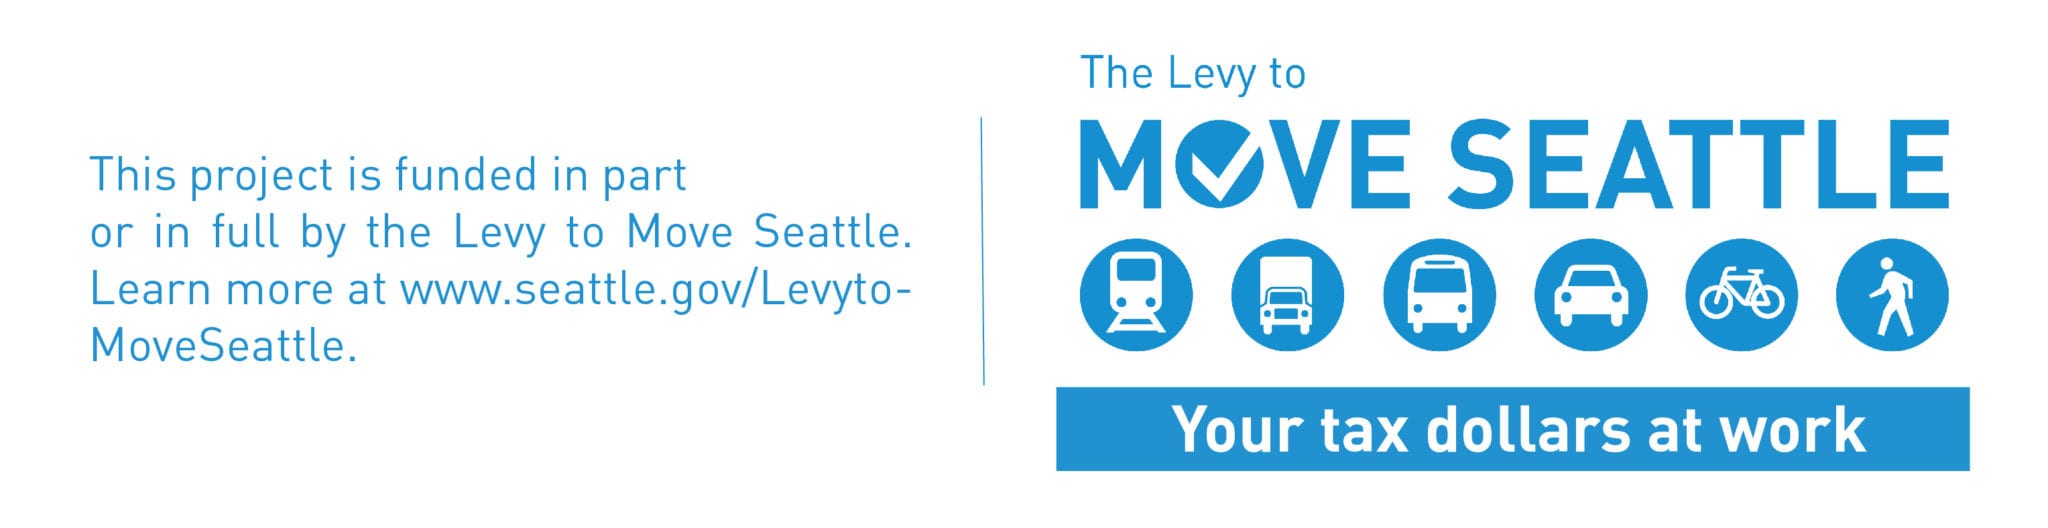 Levy to Move Seattle Logo. Text reads: "This project is funded in part or in full by the Levy to Move Seattle.  Learn more at www.seattle.gov/LevytoMoveSeattle. The logo also contains the text "The Levy to Move Seattle Your tax dollars at work" and logos left to right of a streetcar, truck, bus, car, bike, and person walking.